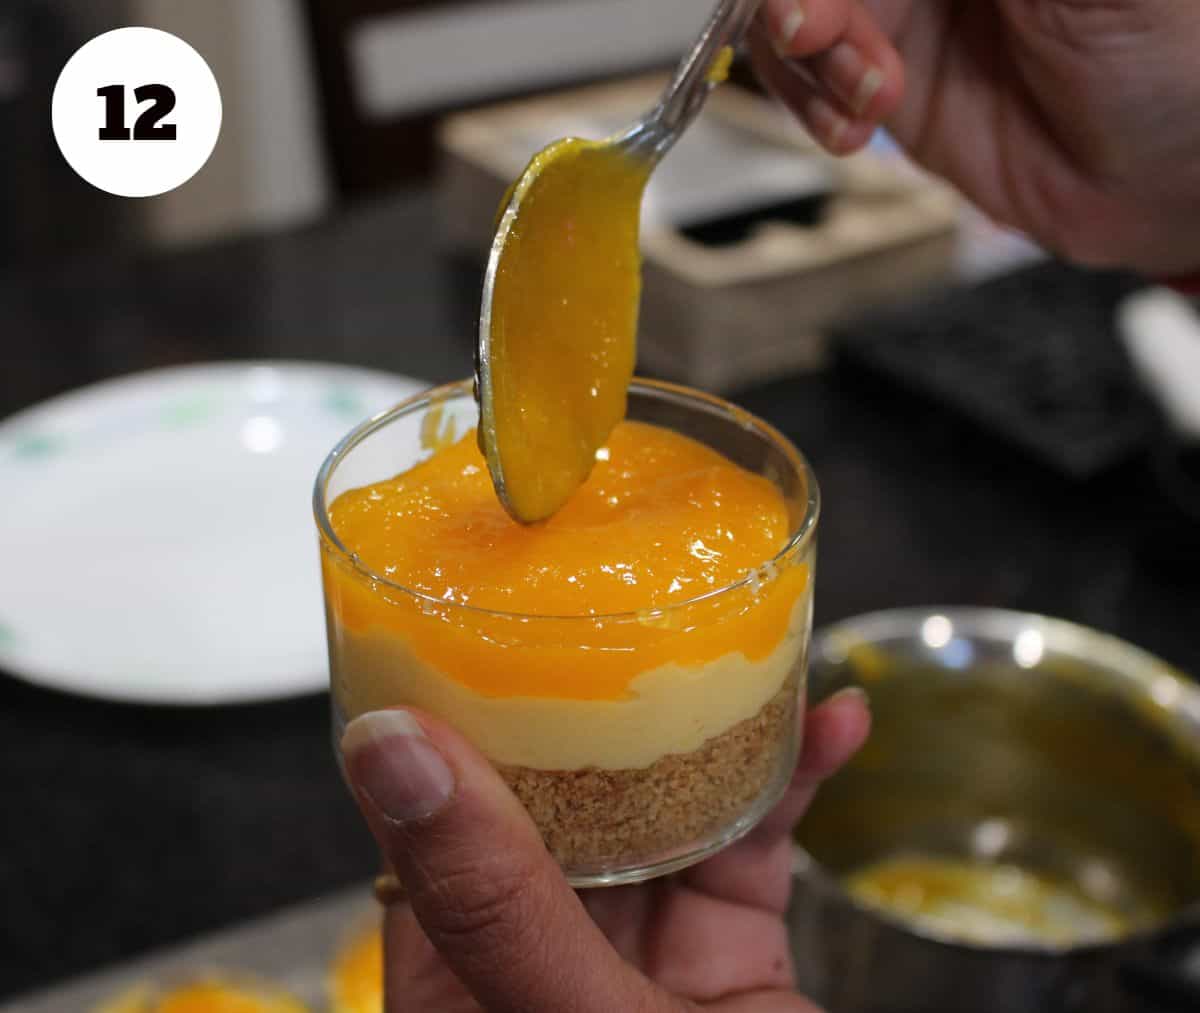 Layering the mango layer on the cheesecake